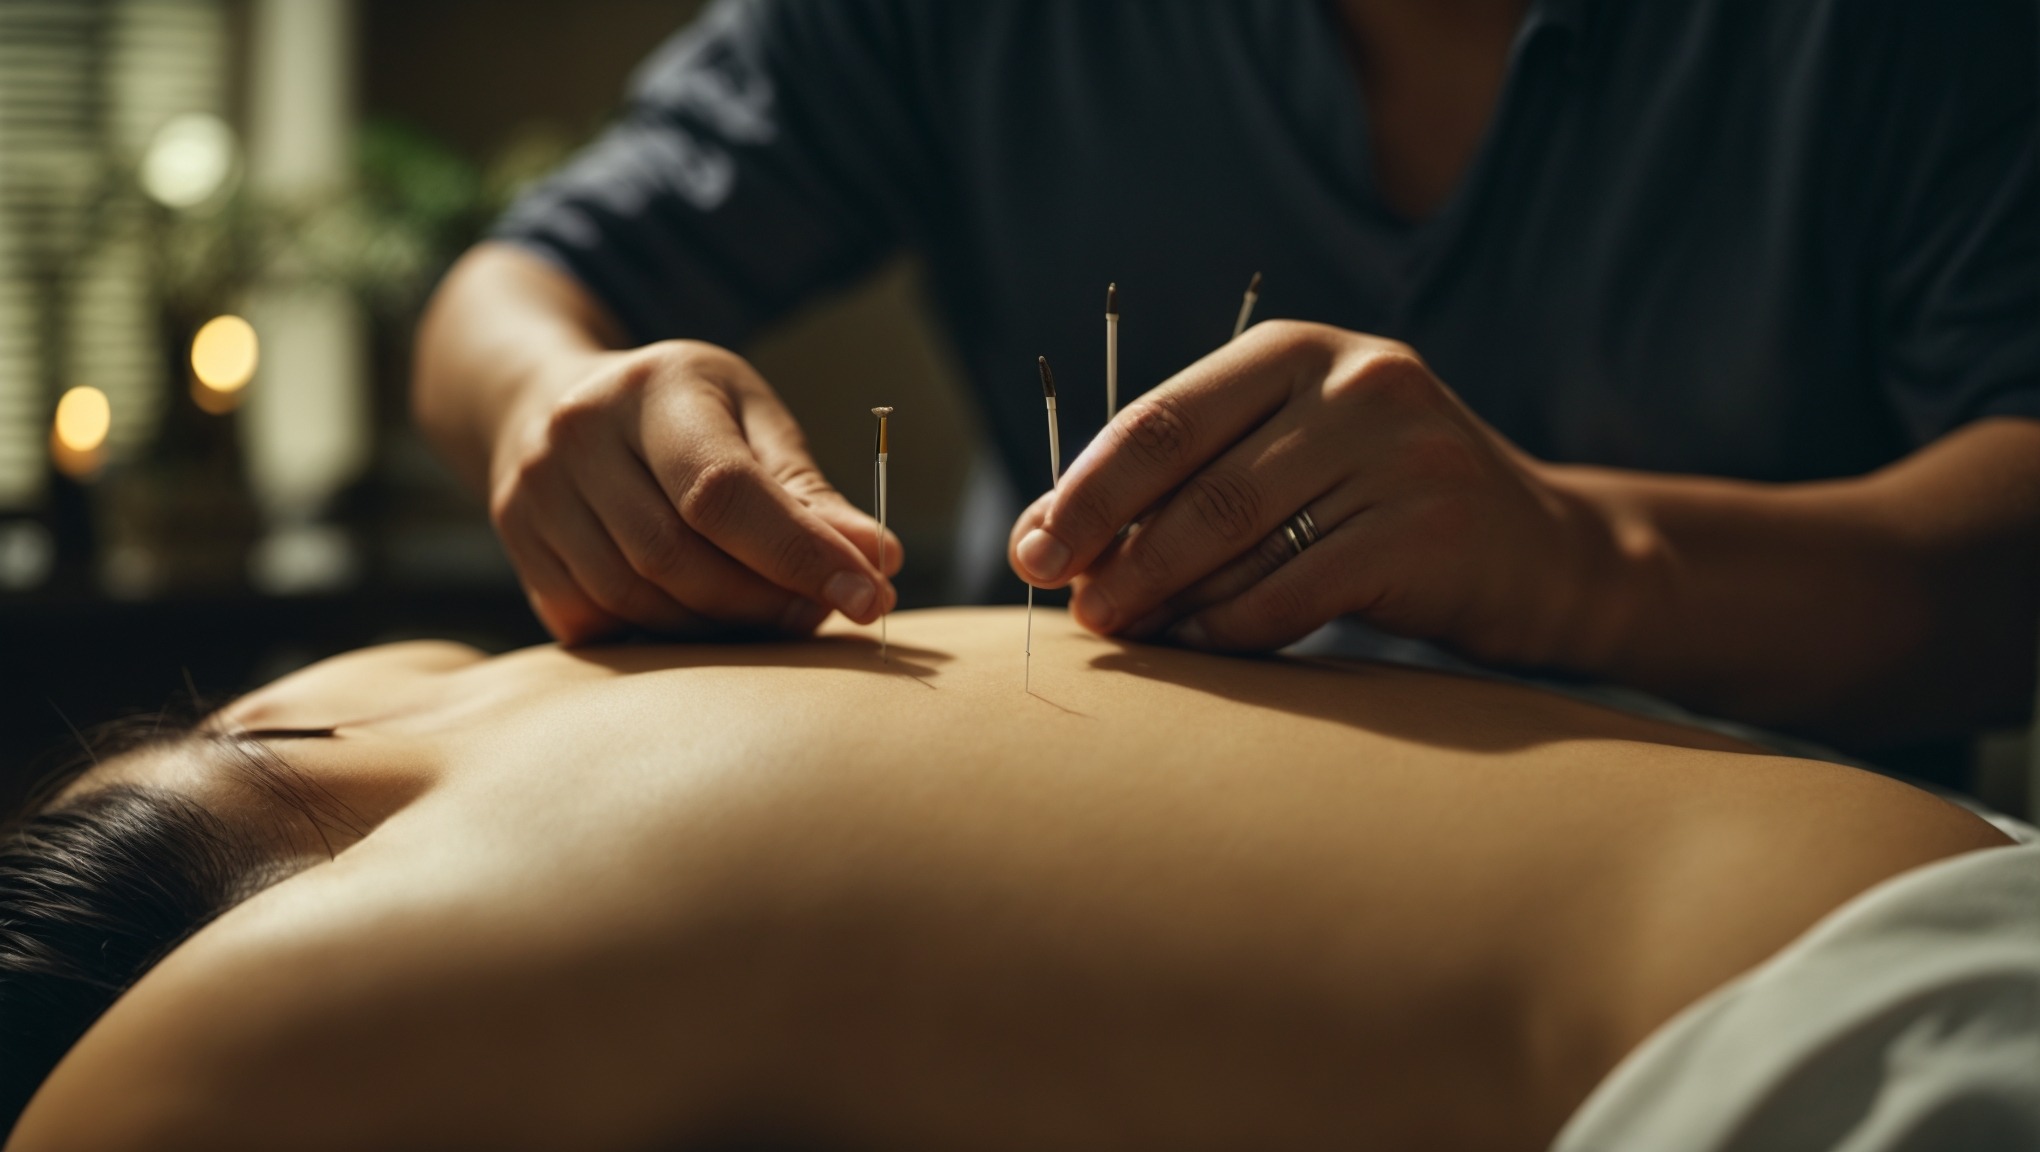 What Happens if You Move During Acupuncture?